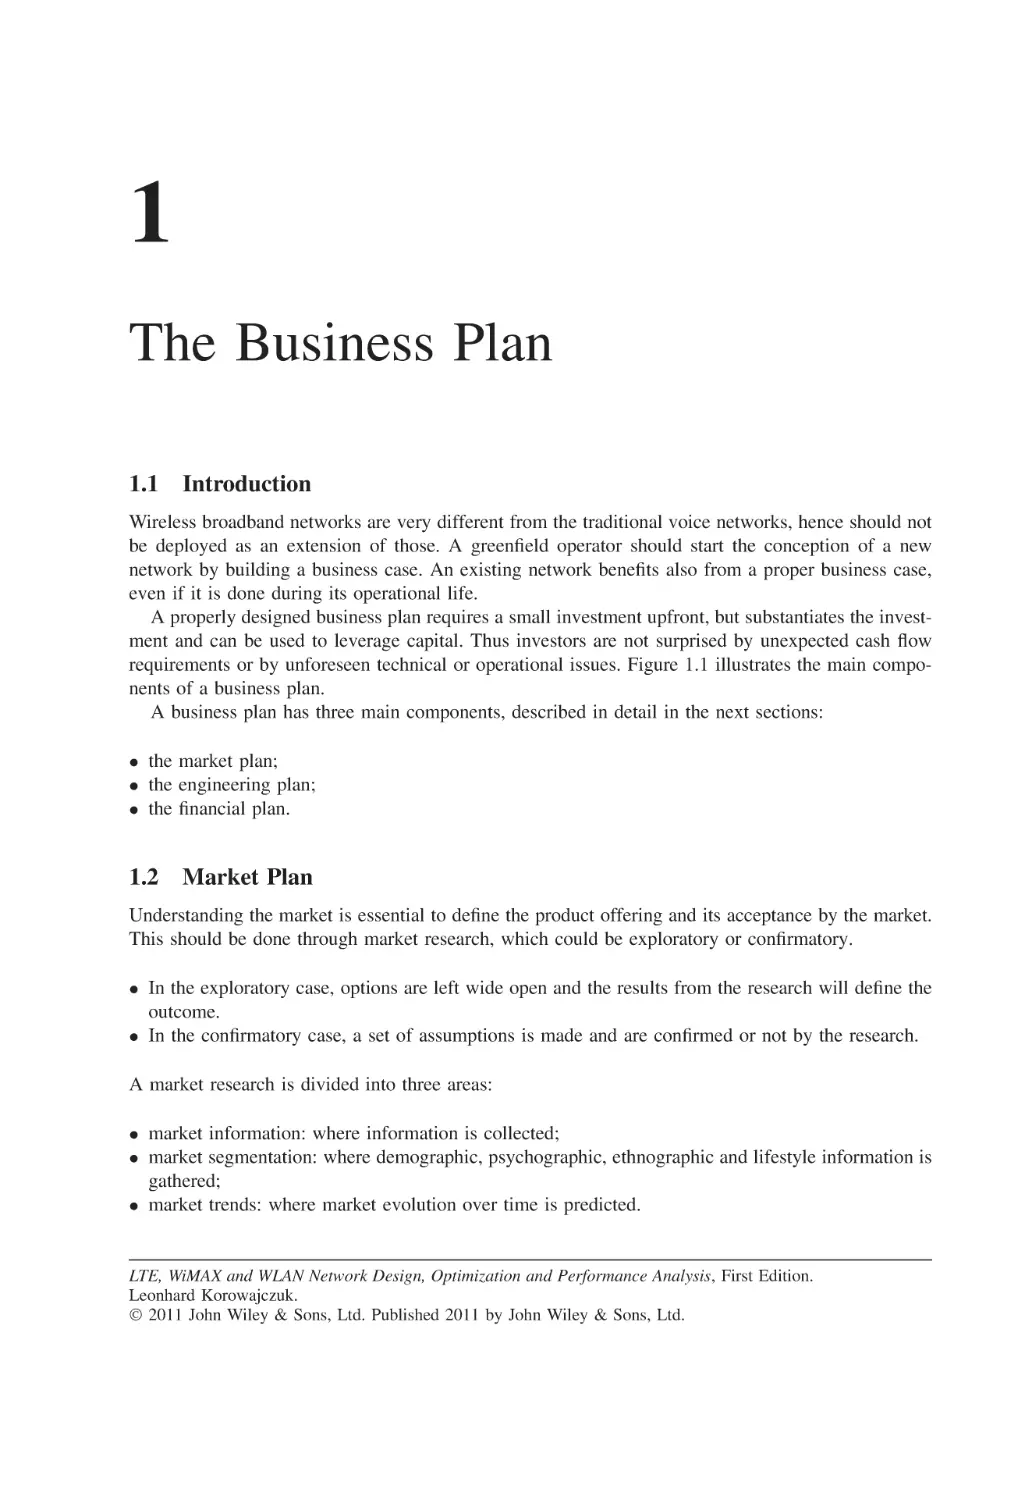 1 The Business Plan
1.1 Introduction
1.2 Market Plan